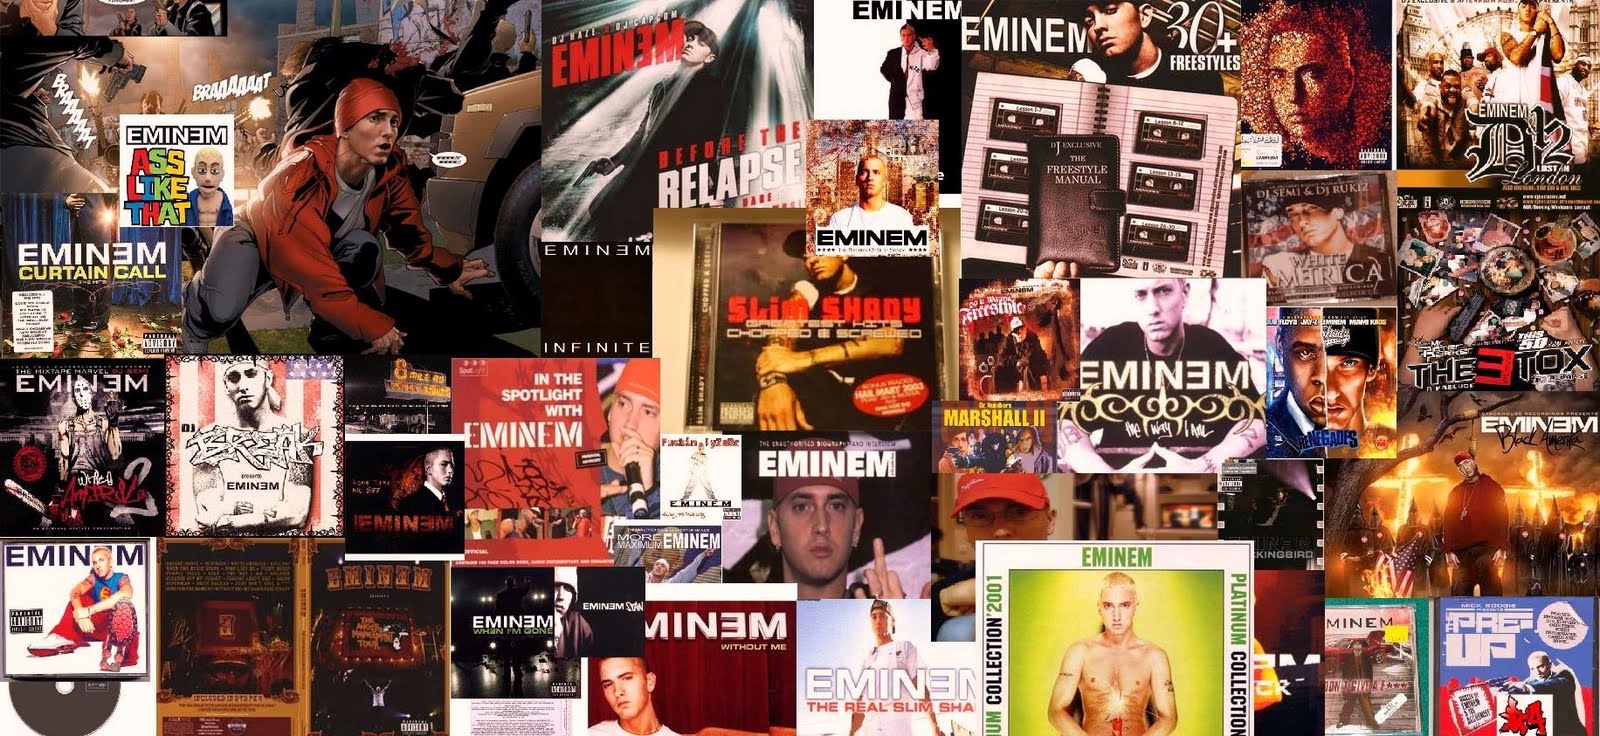 eminem recovery mp3 download torrent